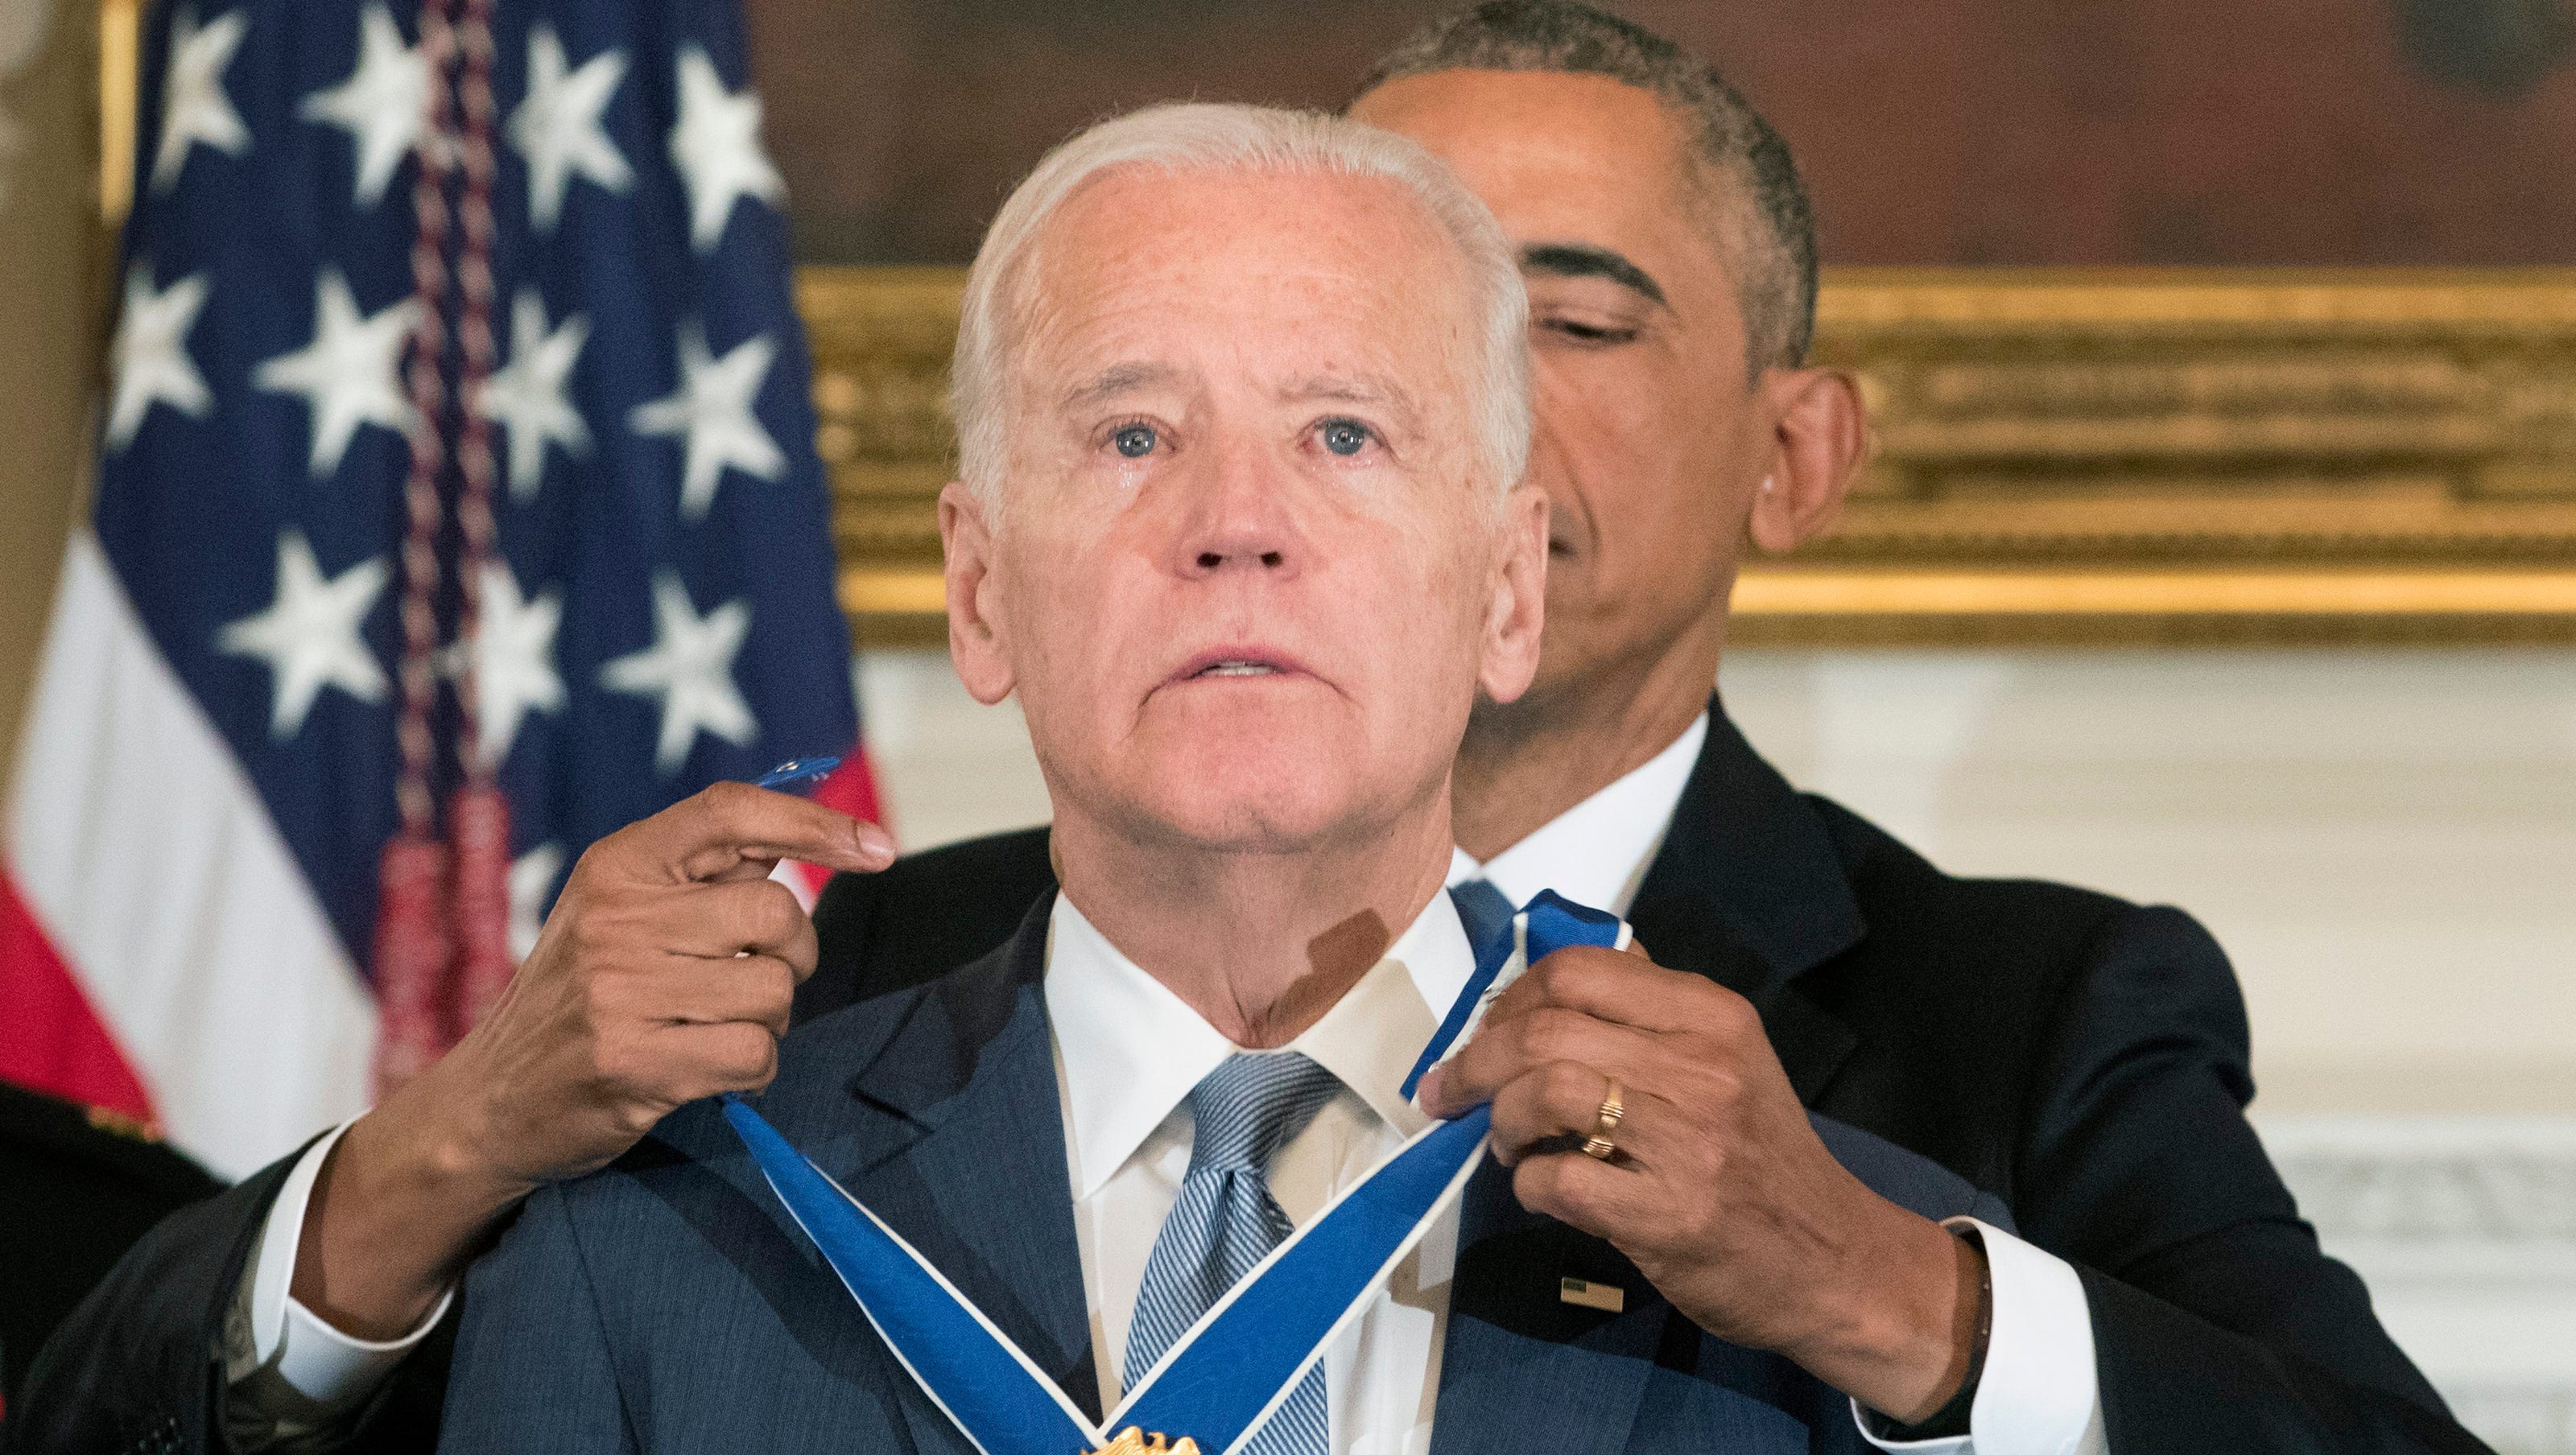 Obama surprises a Biden with Medal Freedom